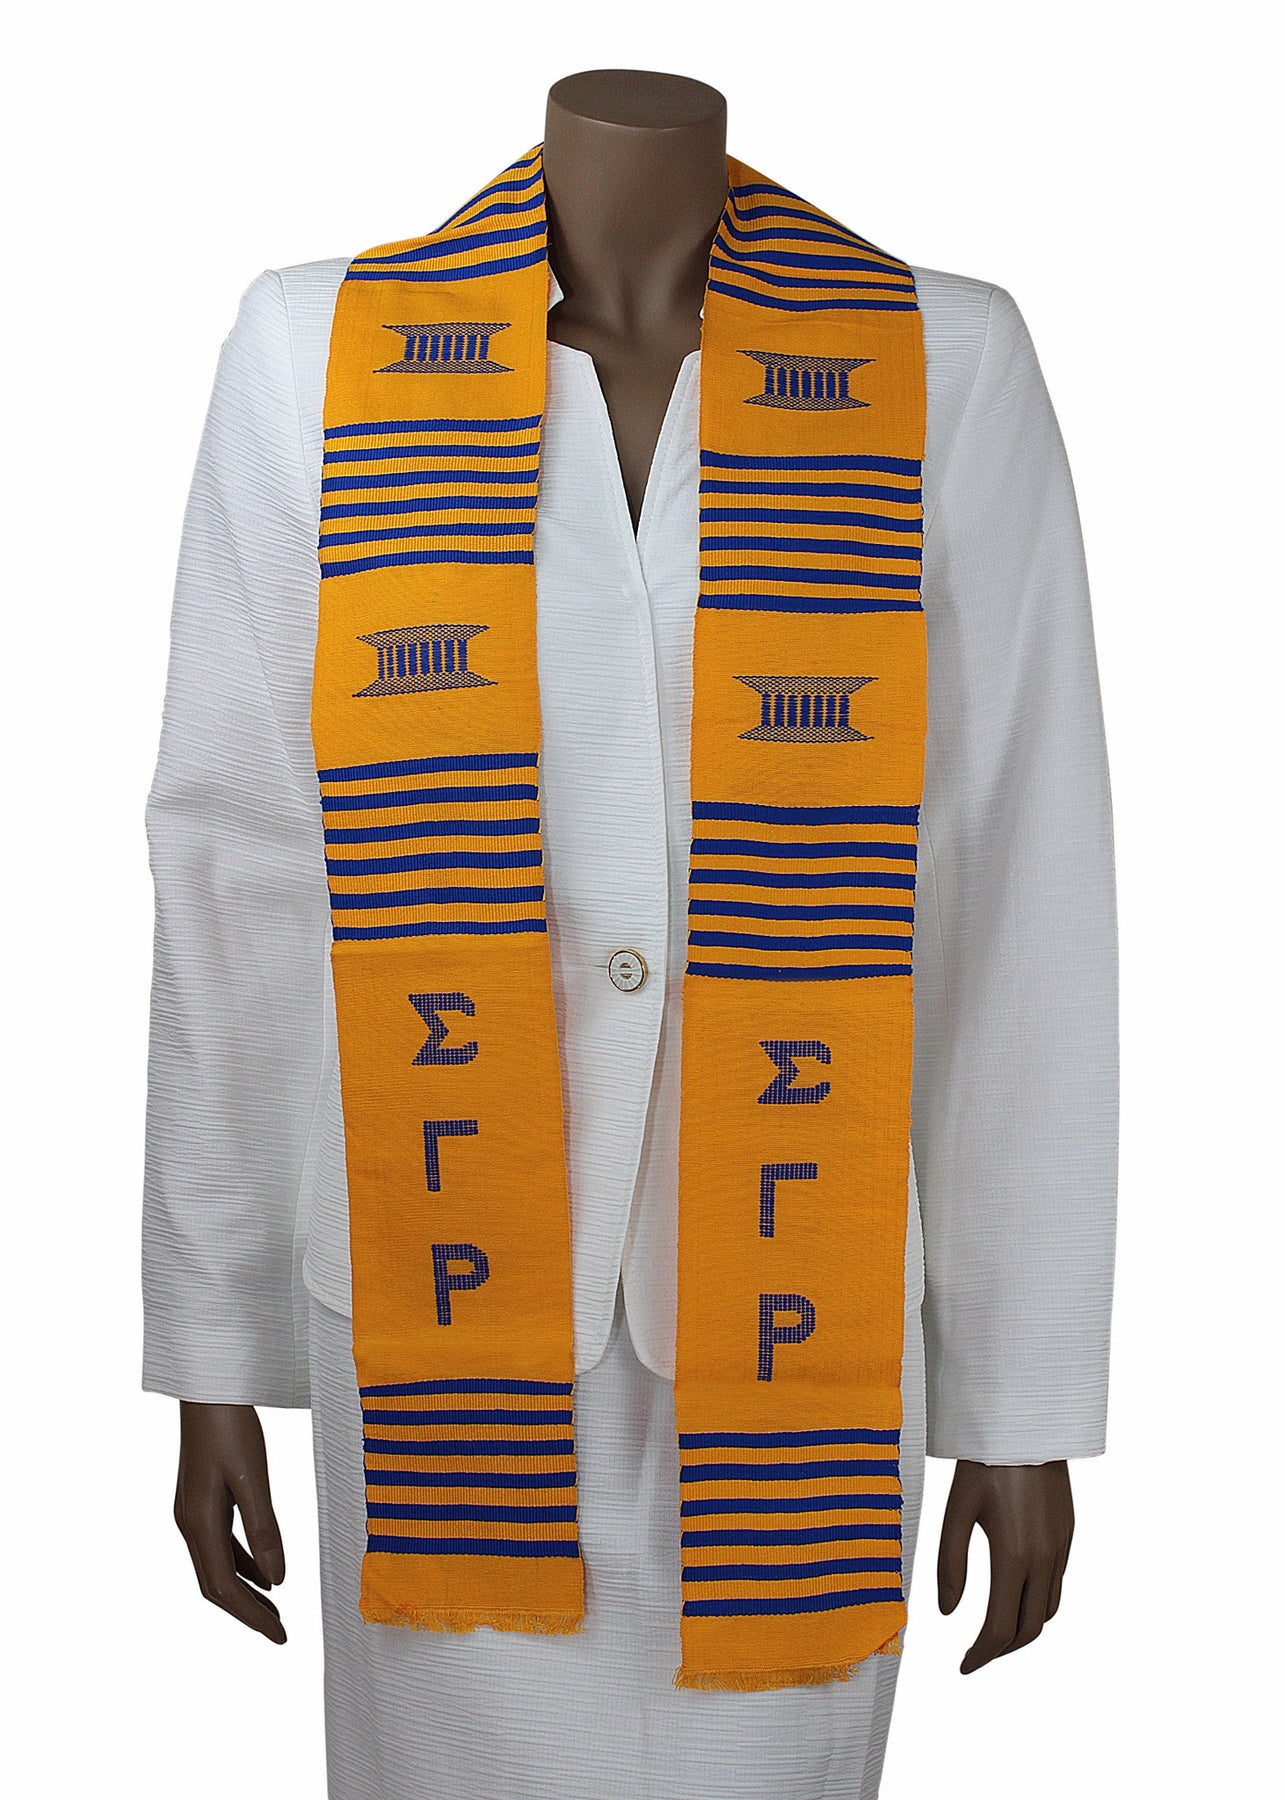 3 of 4: Sigma Gamma Rho Gold Kente Stole by Gold Coast Africa